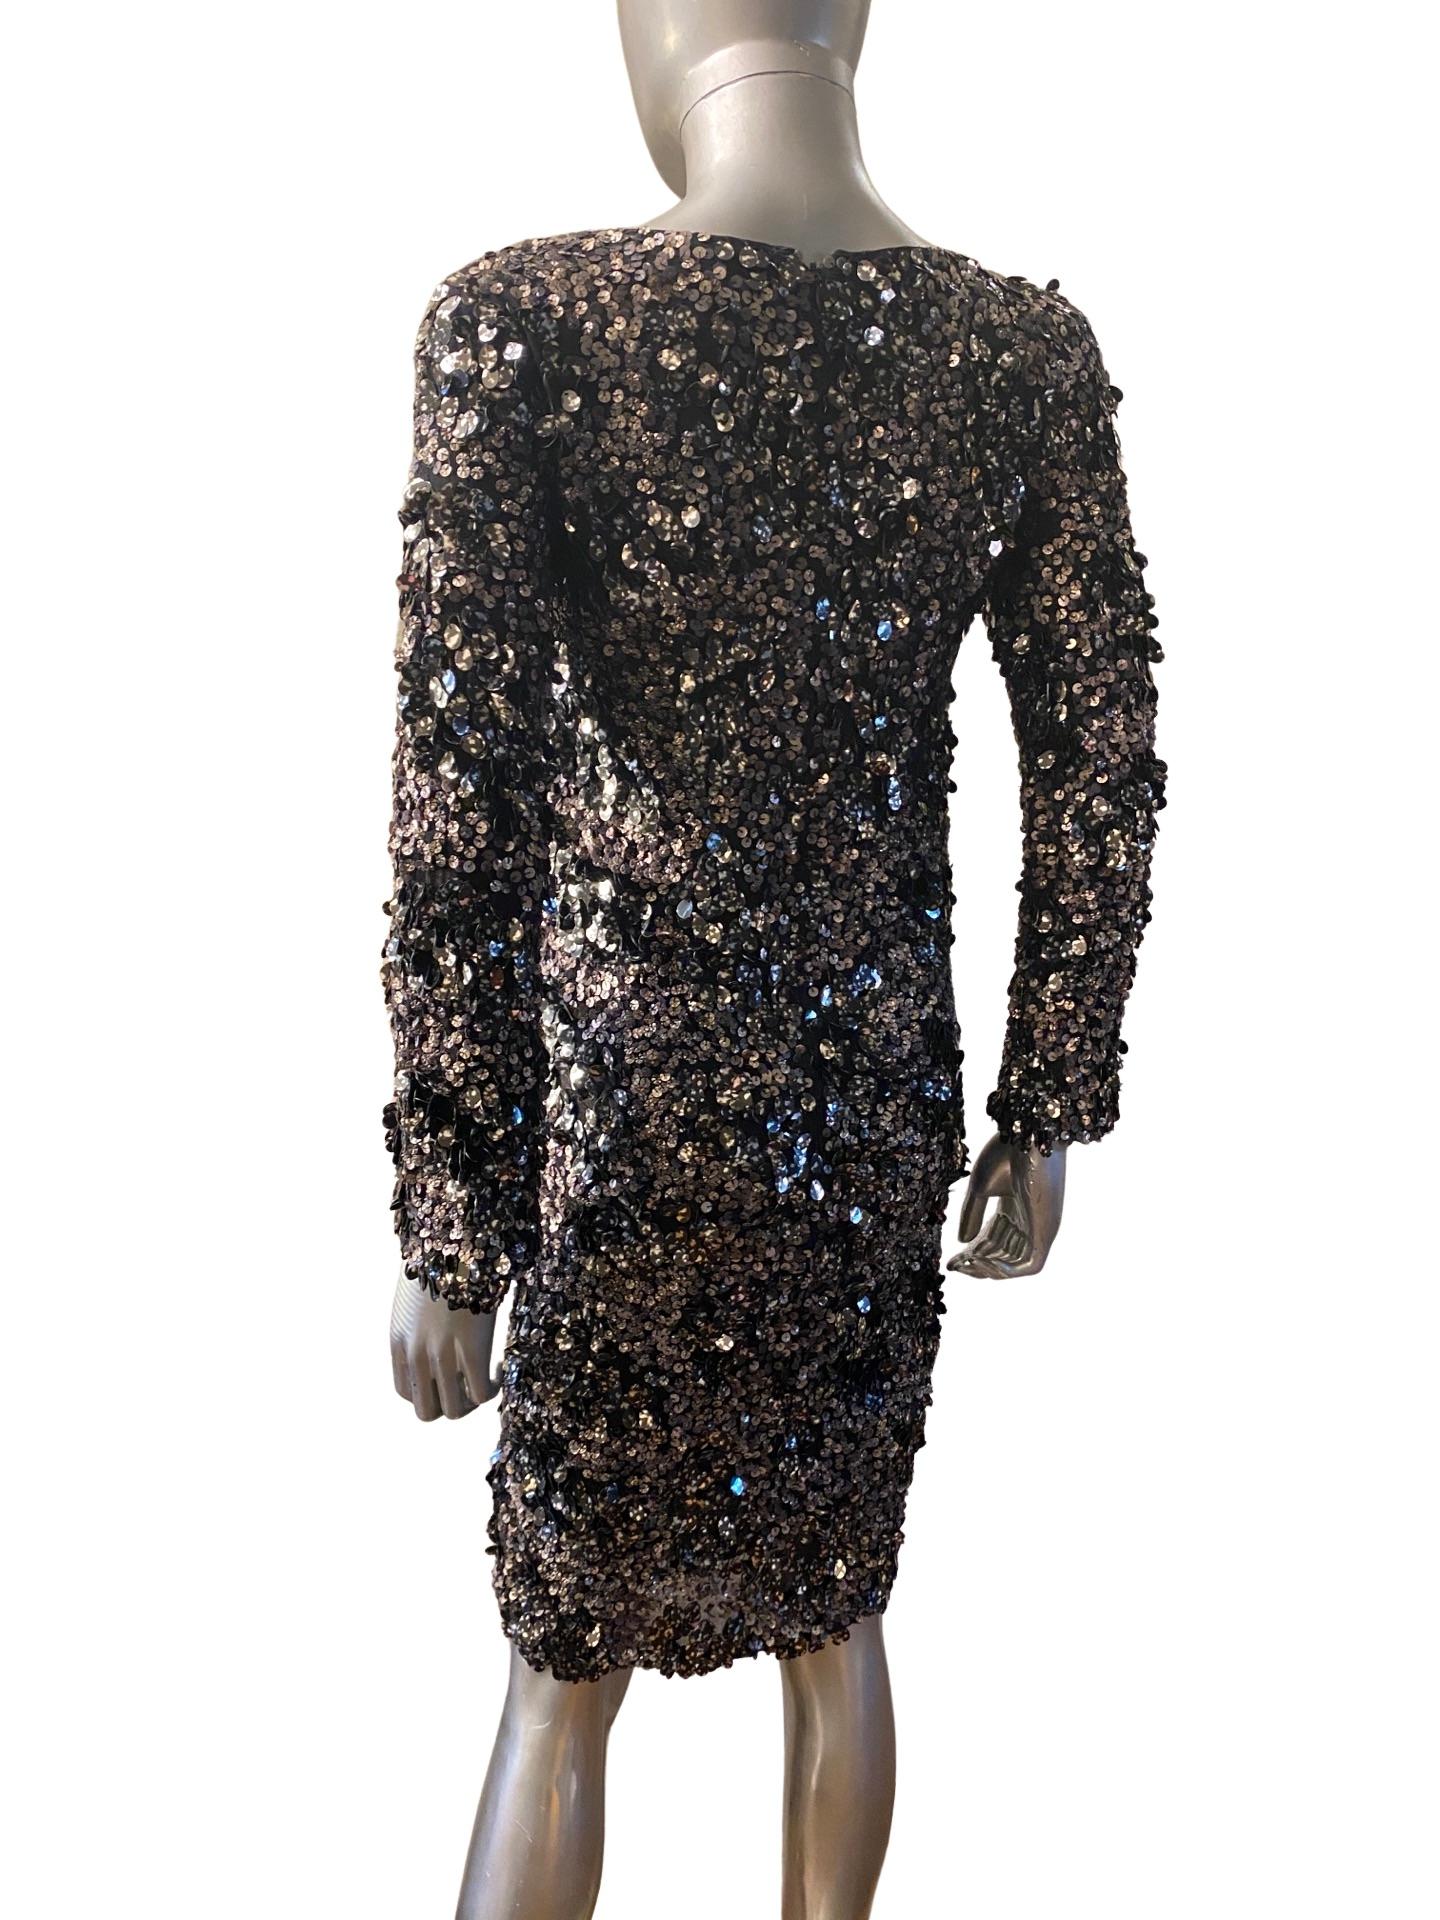 dress with dangling sequins